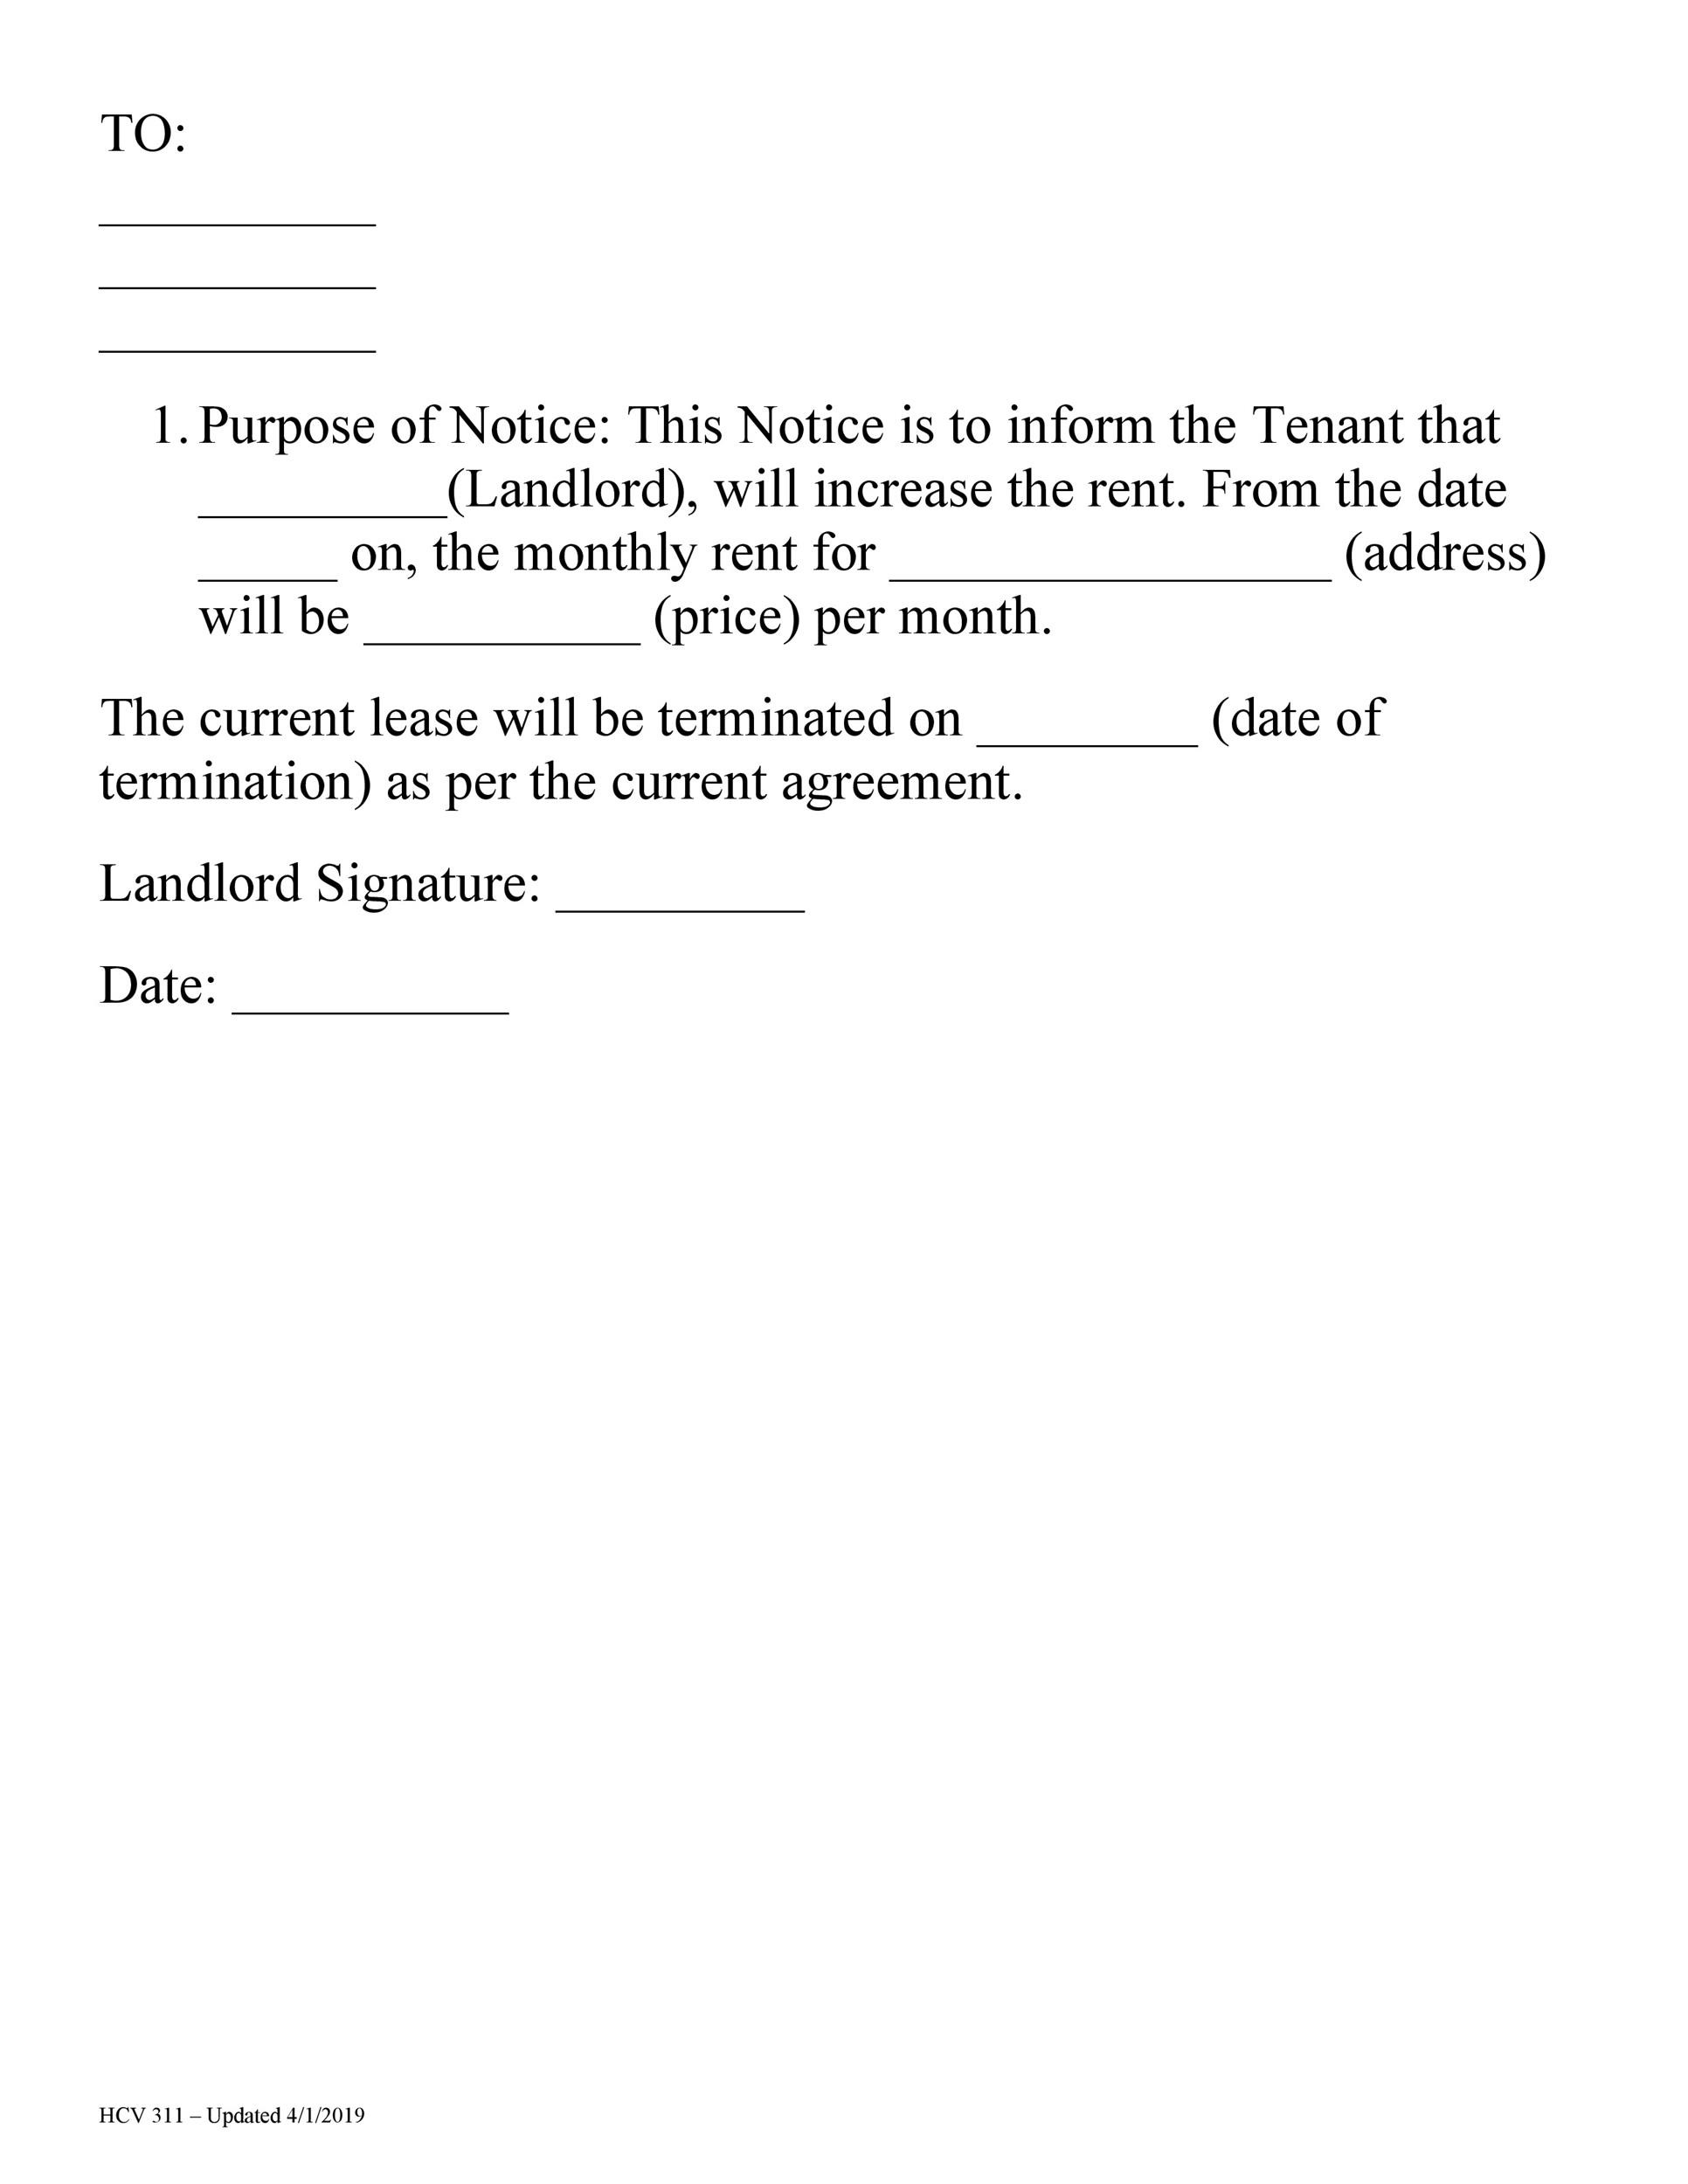 Rent Increase Form Letter from templatelab.com